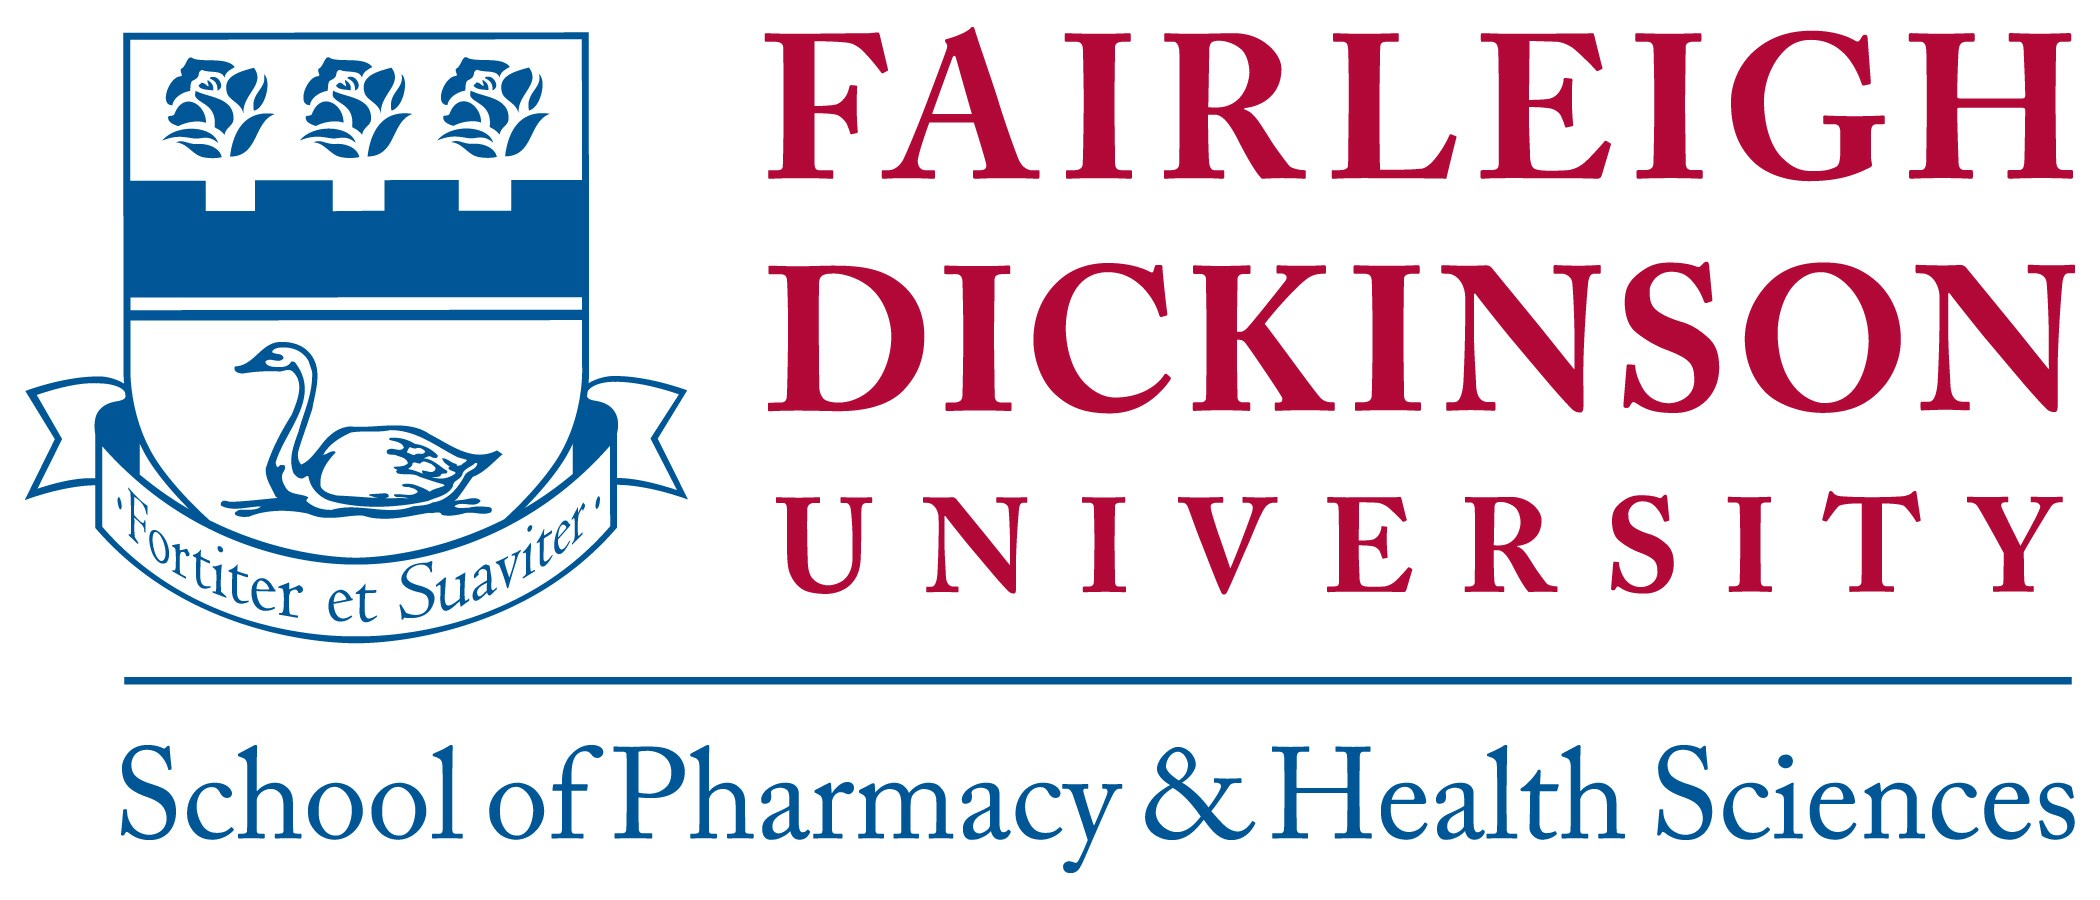 Available for Download | Fairleigh Dickinson University